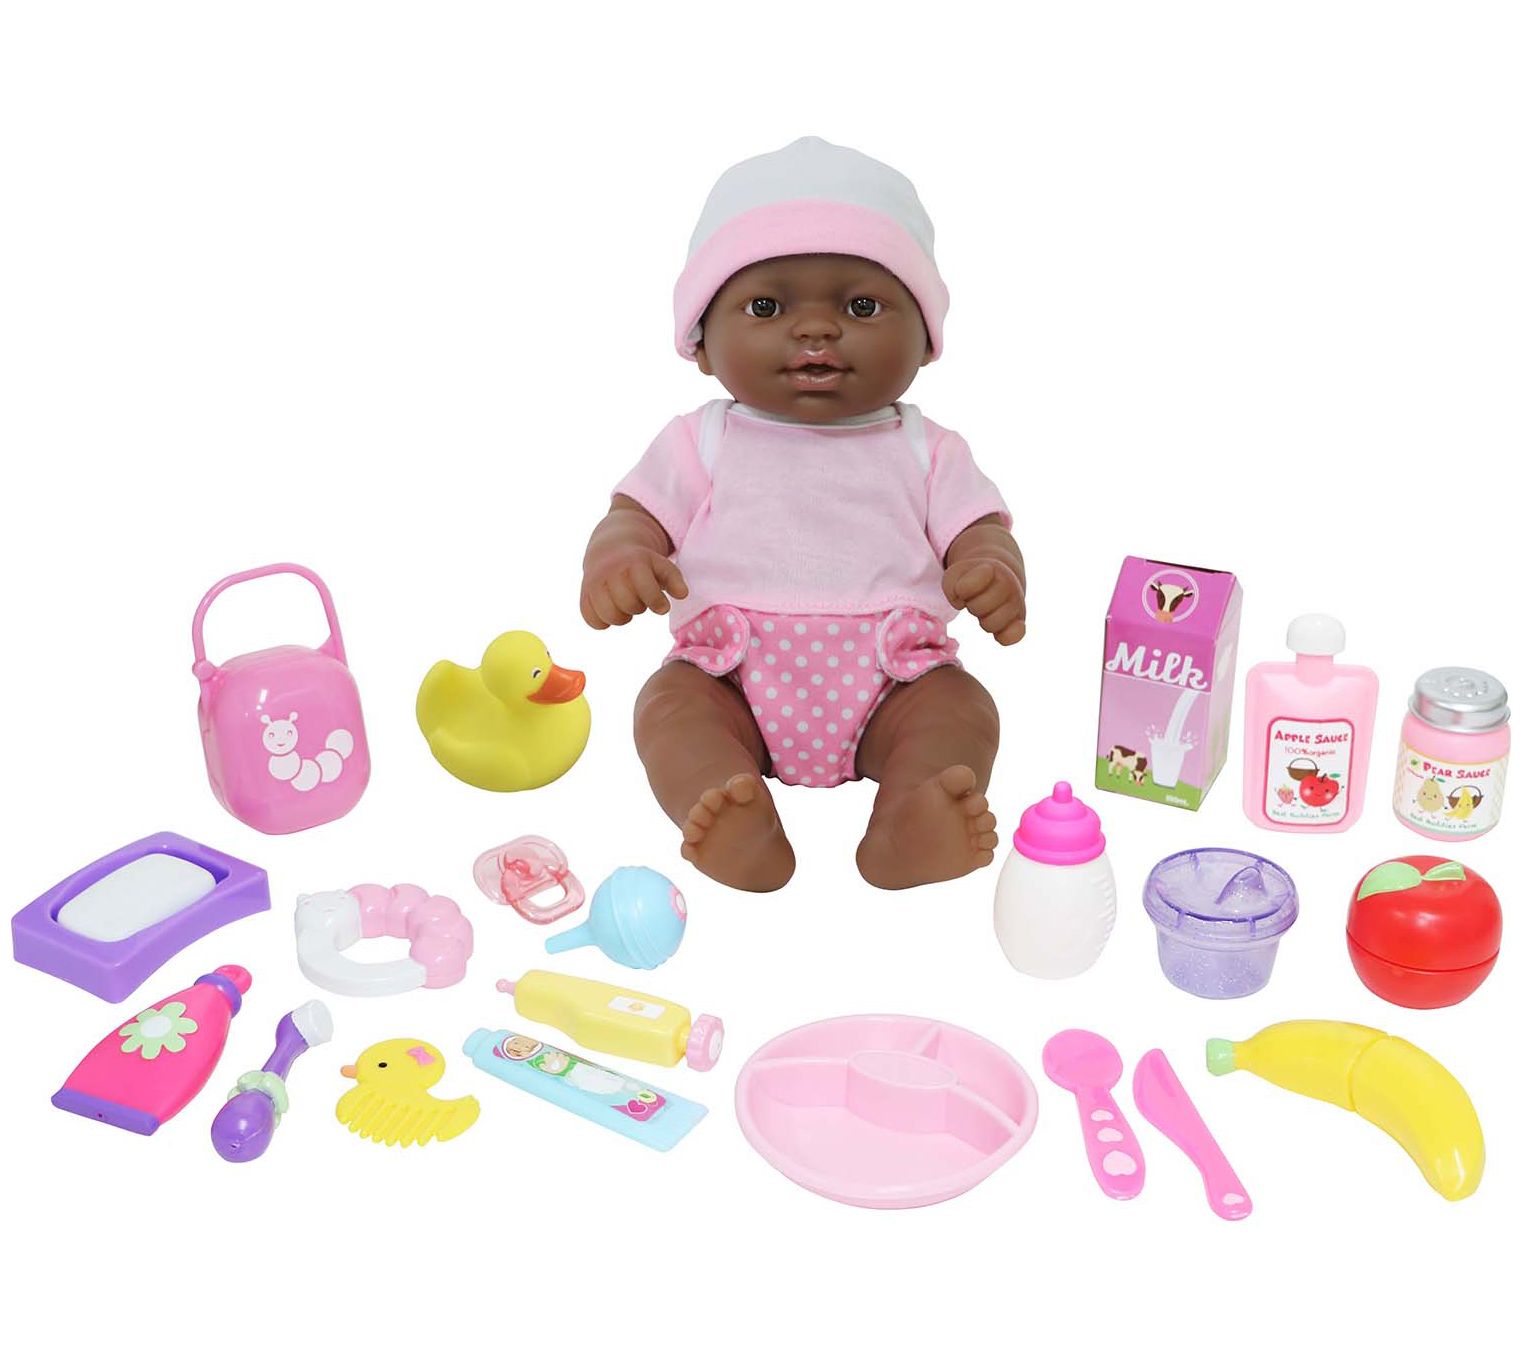 La Newborn African American First Day 14 Real Boy – JC Toys Group Inc.